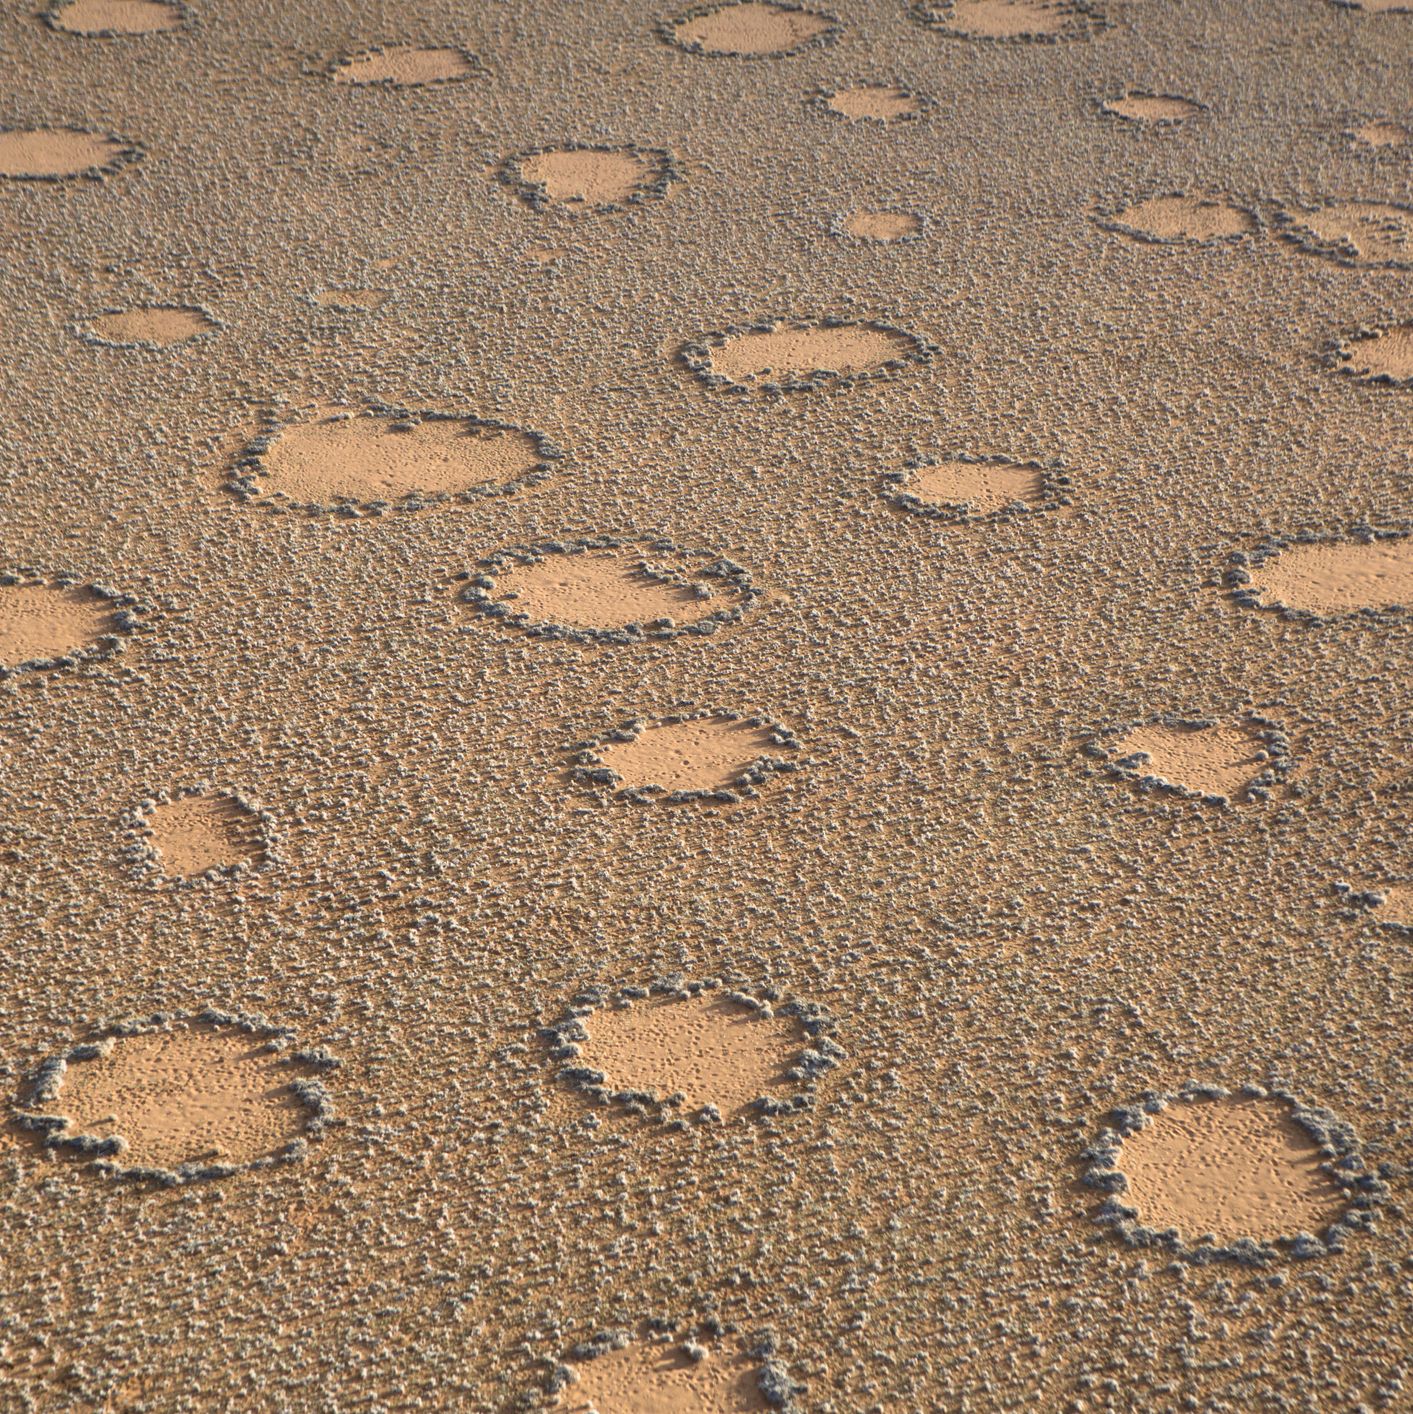 Fairy Circles May Now Exist in 15 Countries. We Still Don't Understand Them.